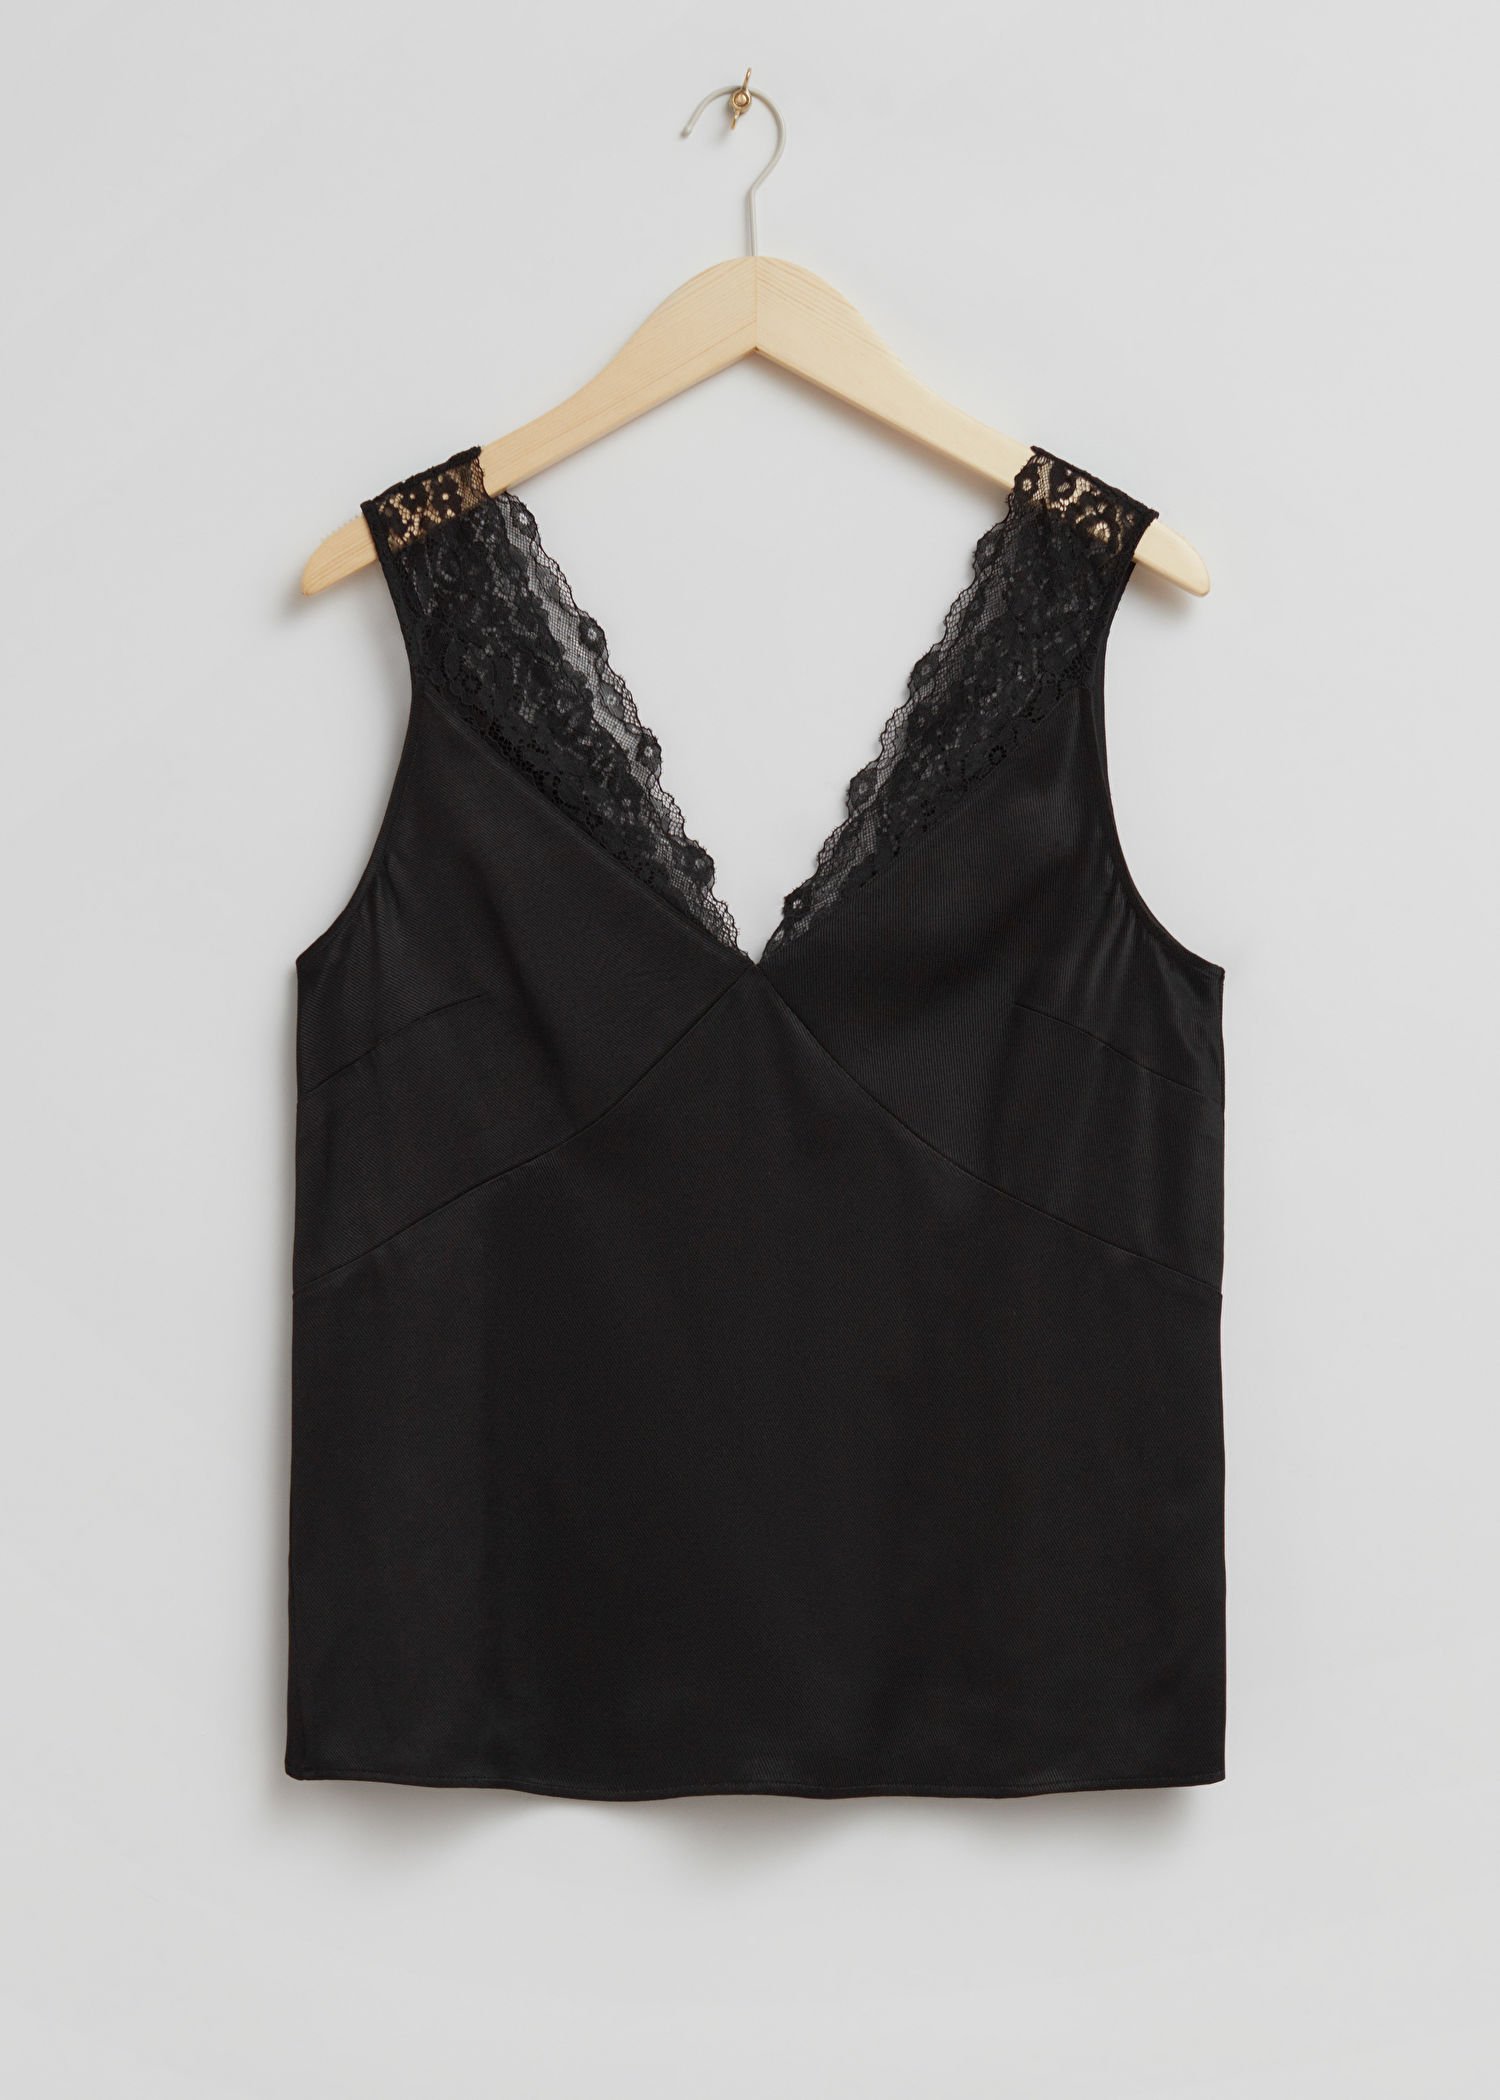  OTHER STORIES Relaxed Lace Detail Top in Black